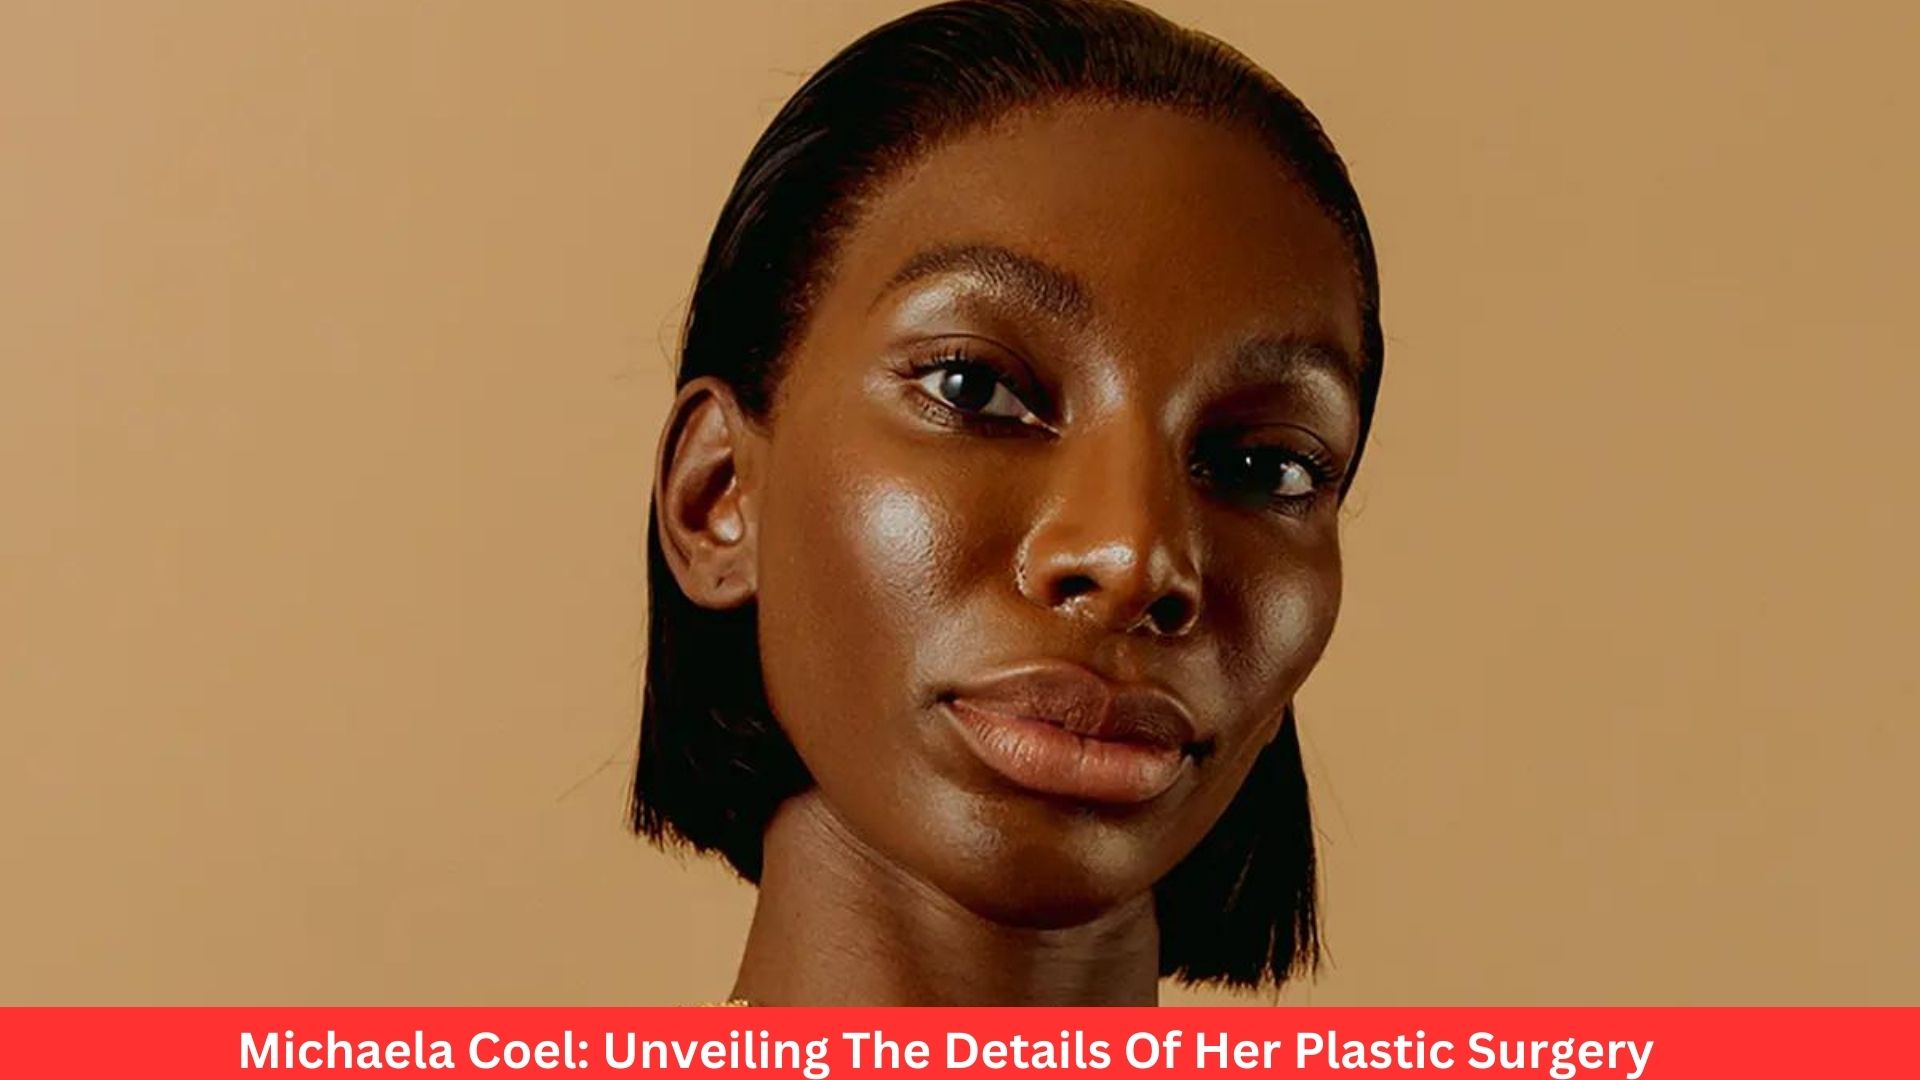 Michaela Coel: Unveiling The Details Of Her Plastic Surgery